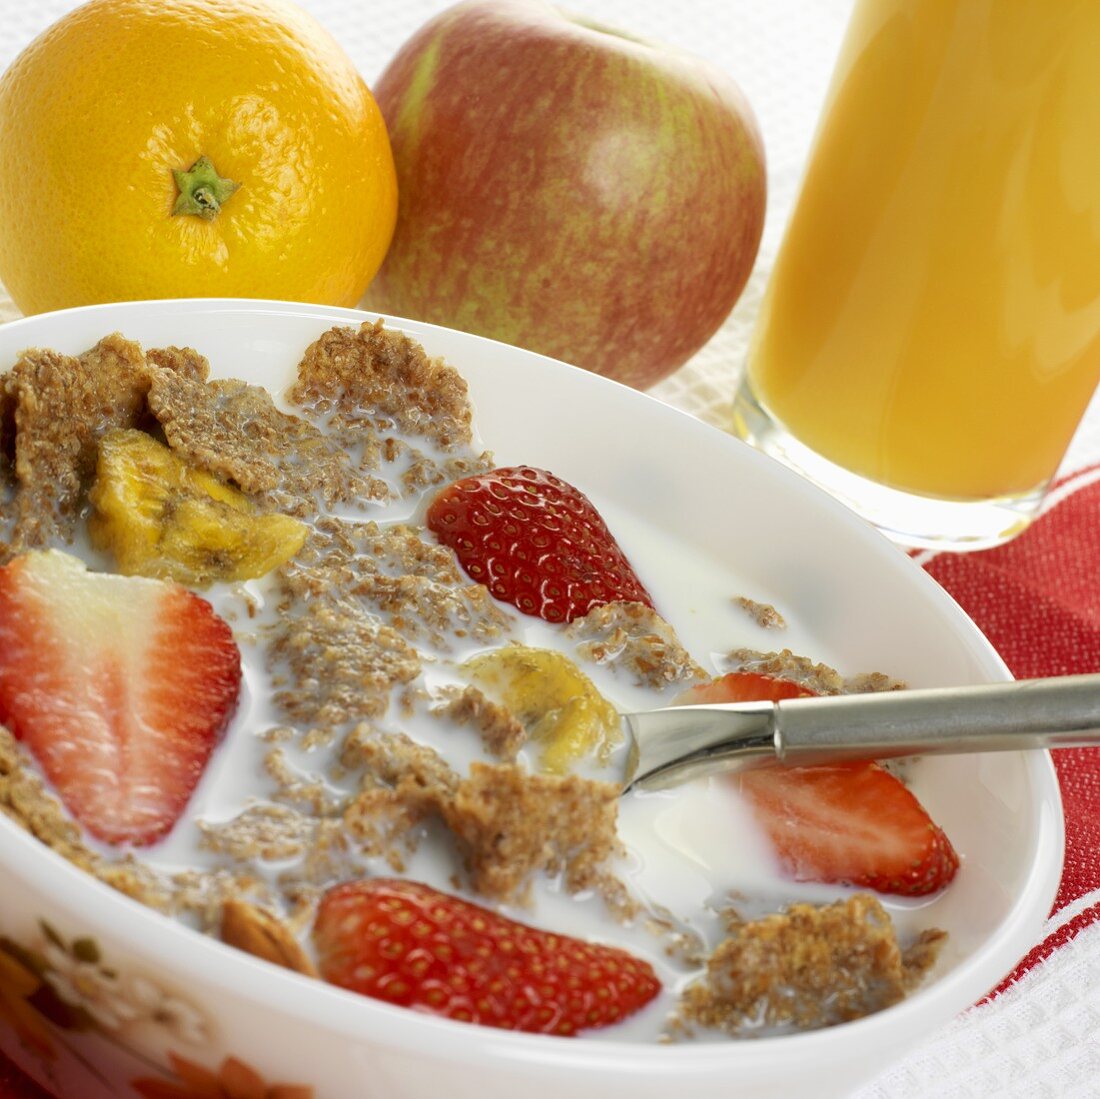 Cereal flakes with fruit and a glass of orange juice